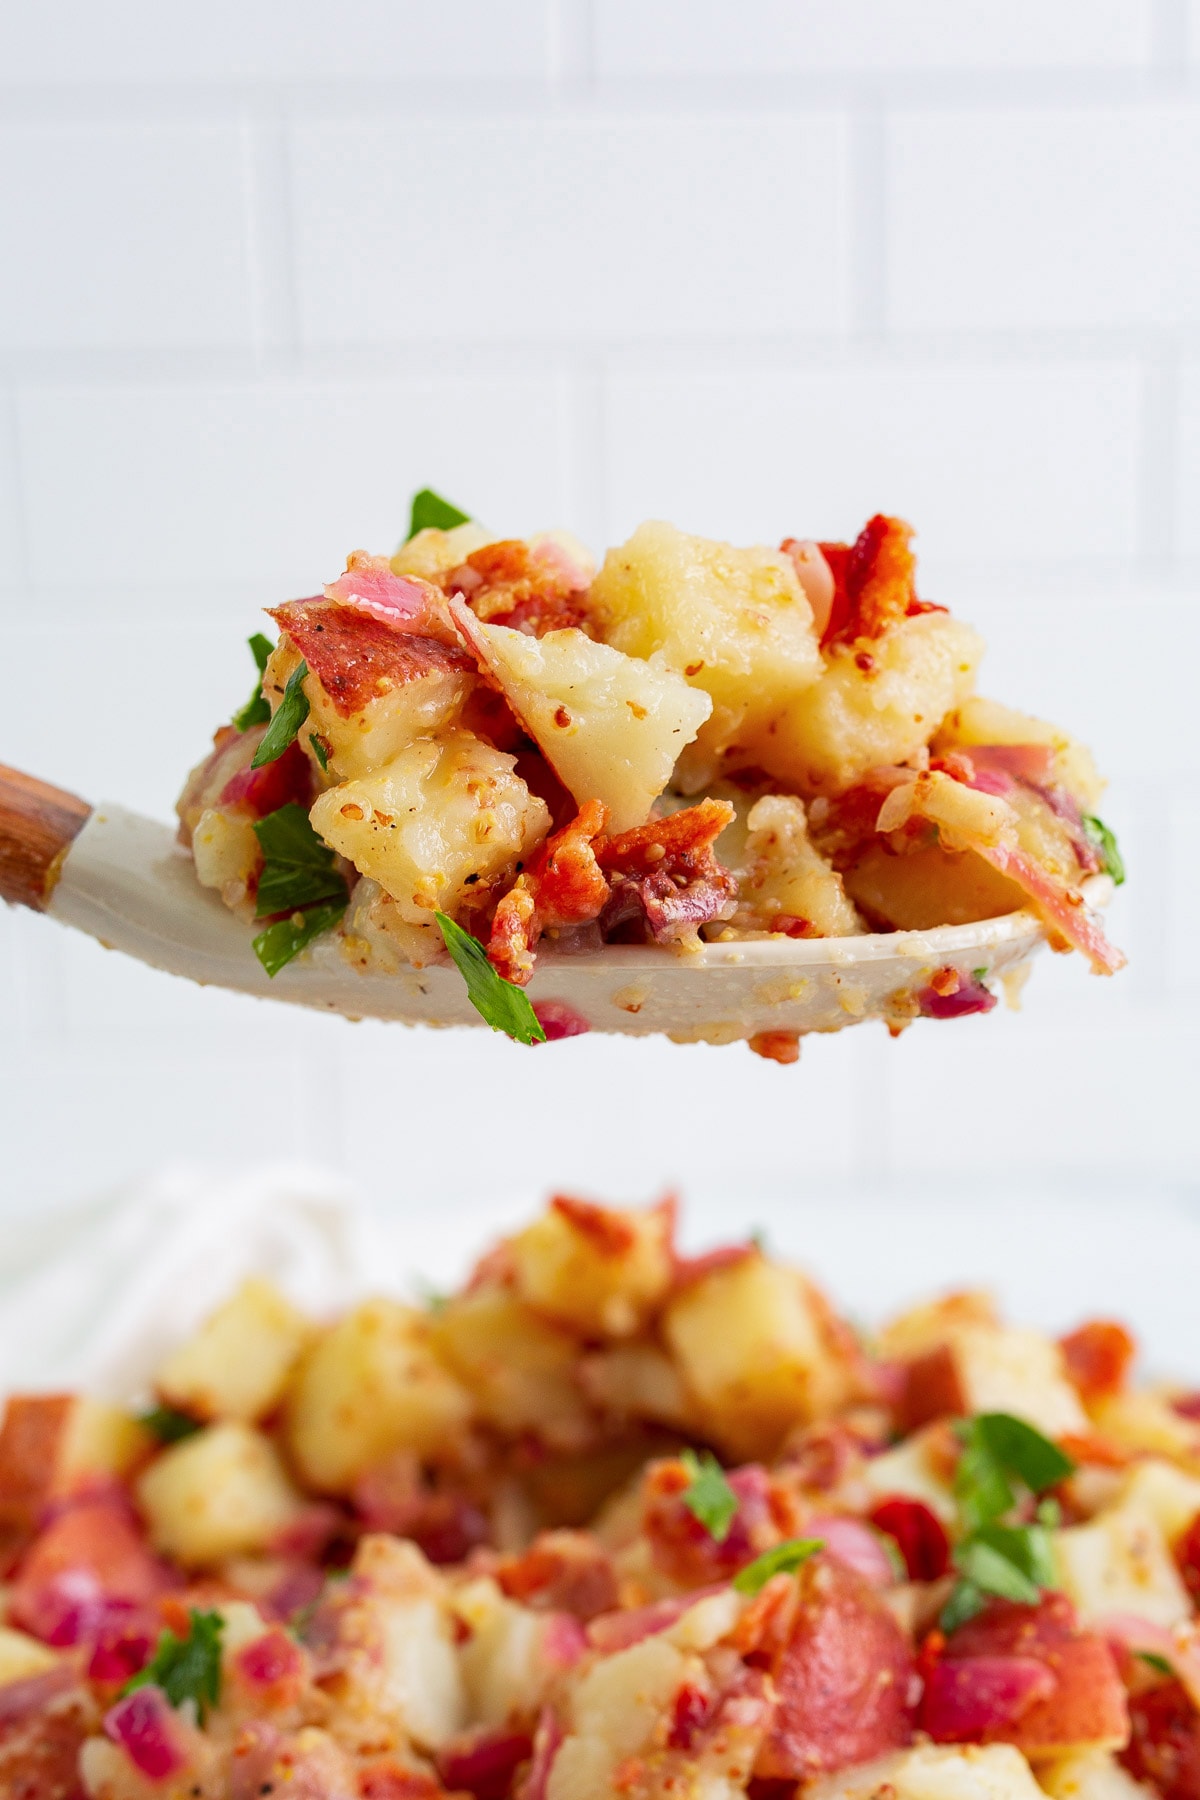 A heaping spoonful of German potato salad topped with freshly chopped parsley.